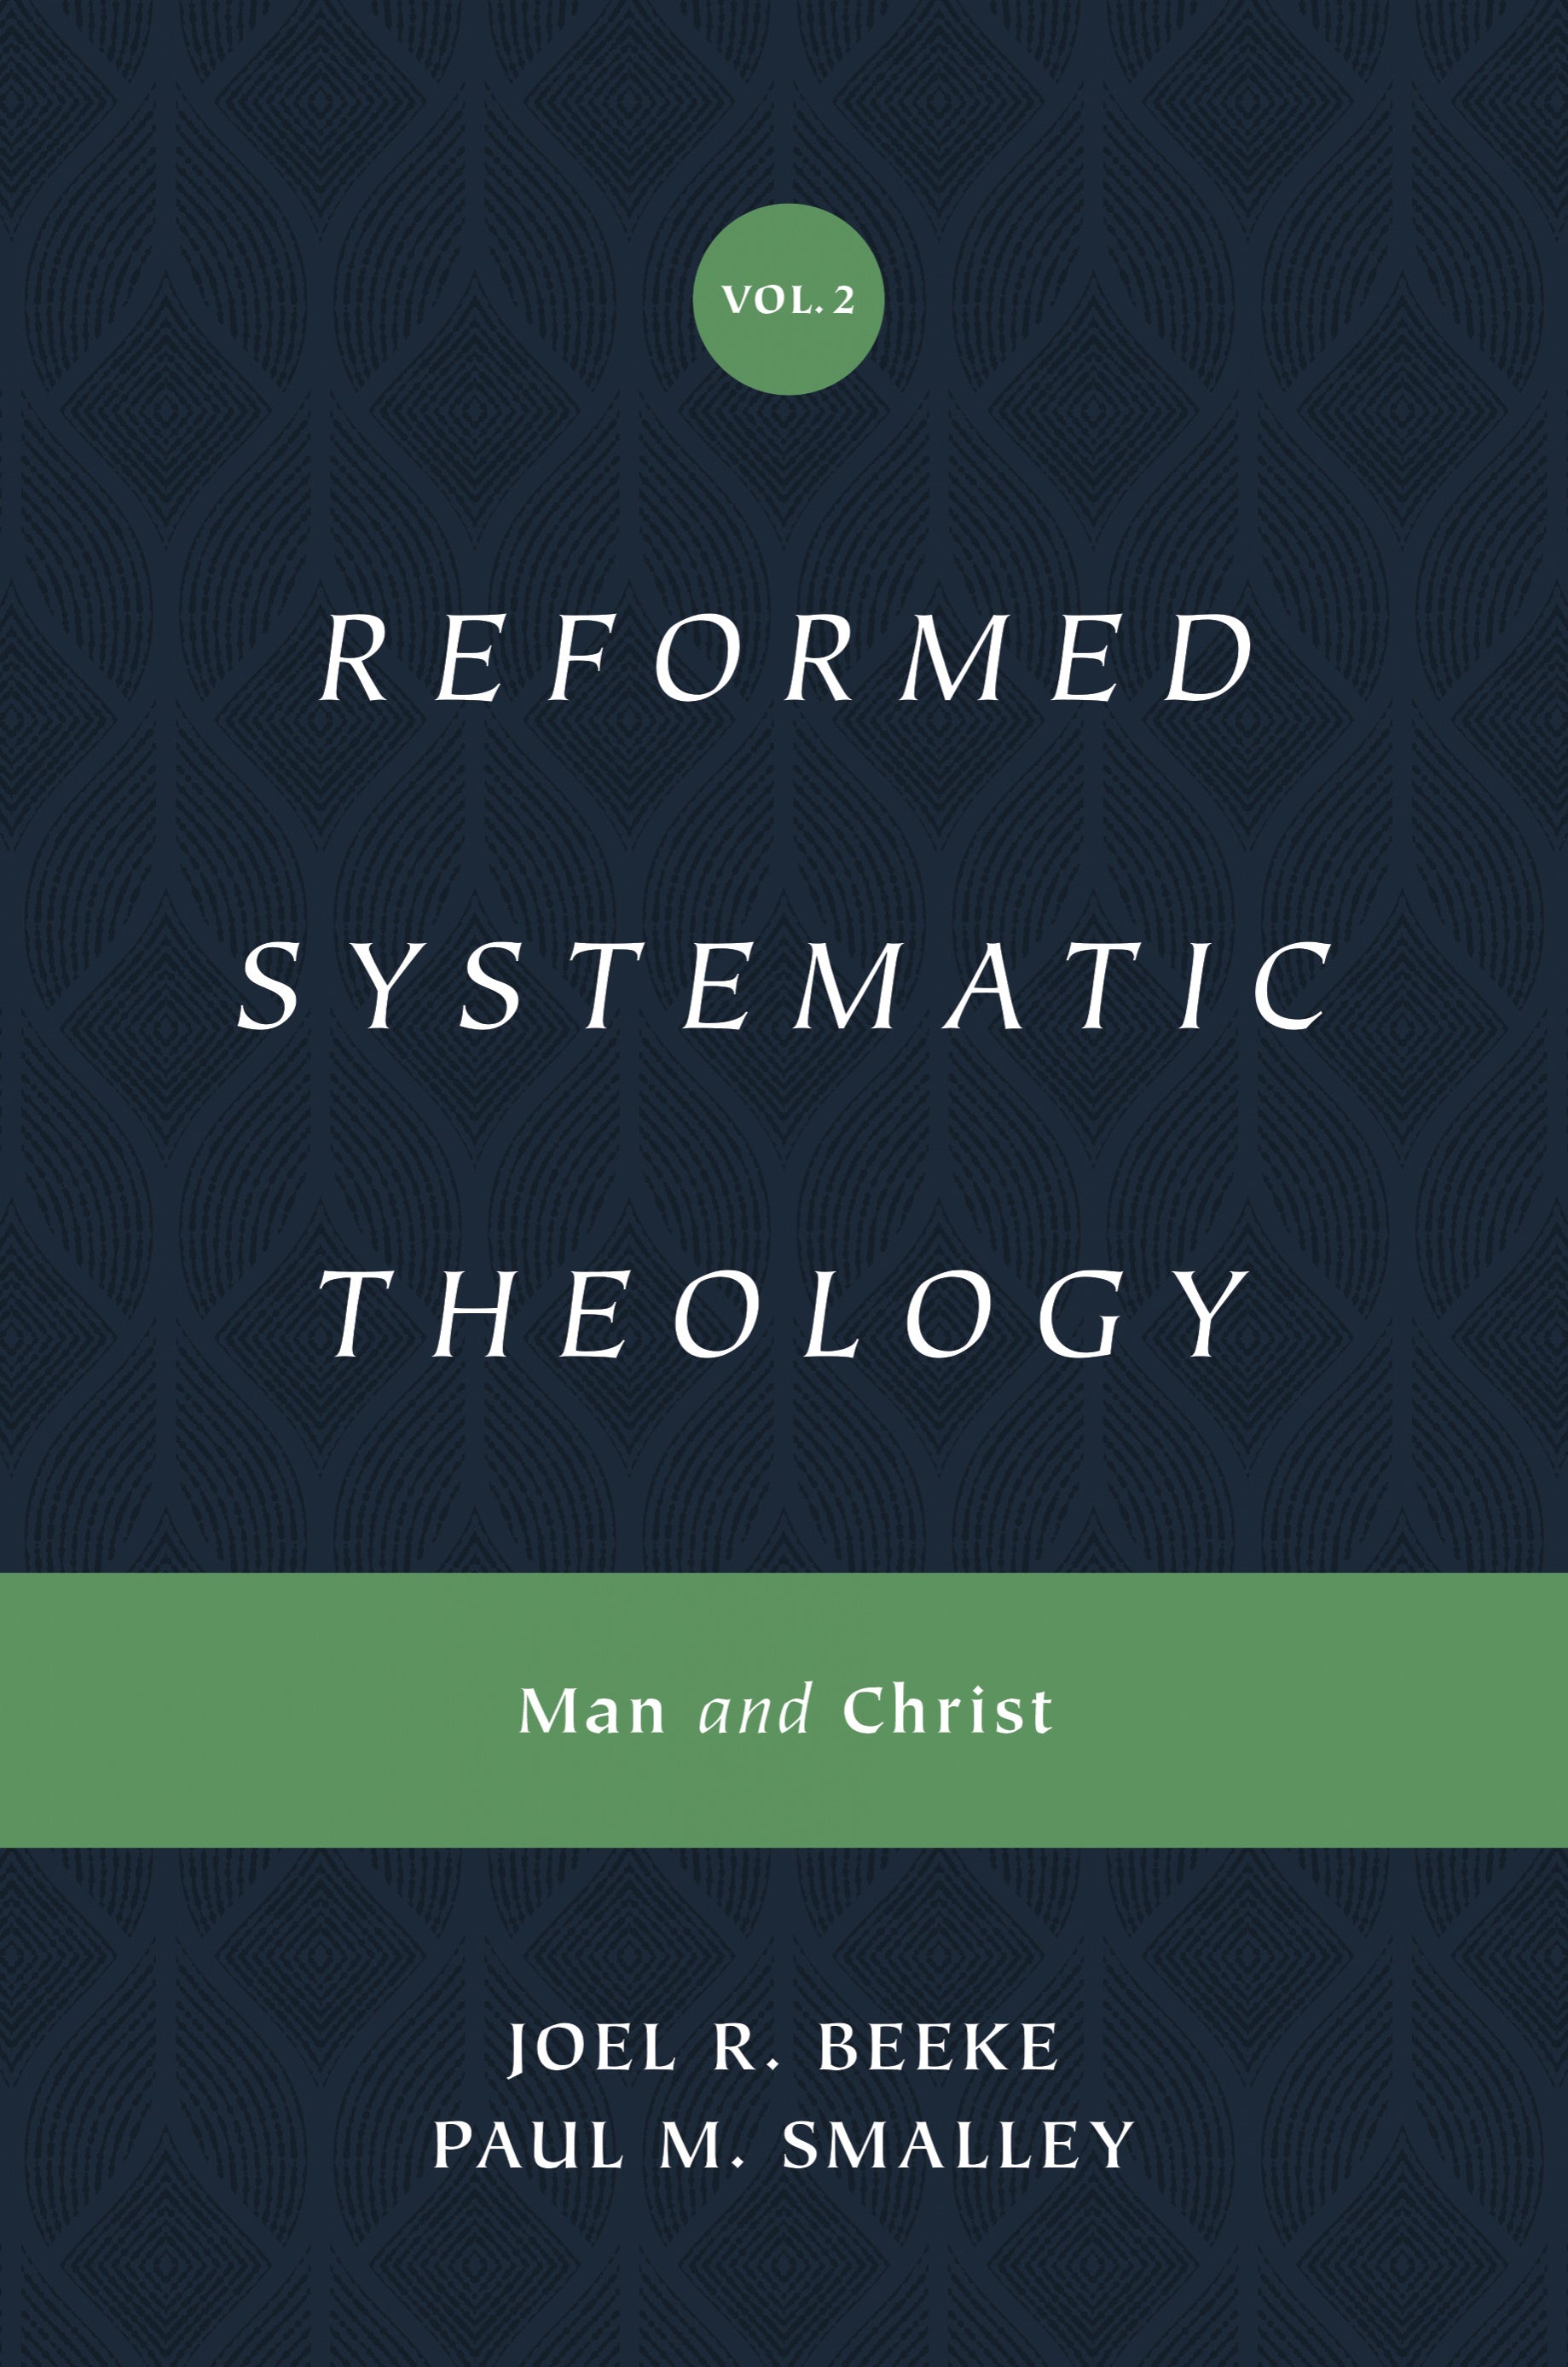 Image of Reformed Systematic Theology (Reformed Experiential Systematic Theology series) other